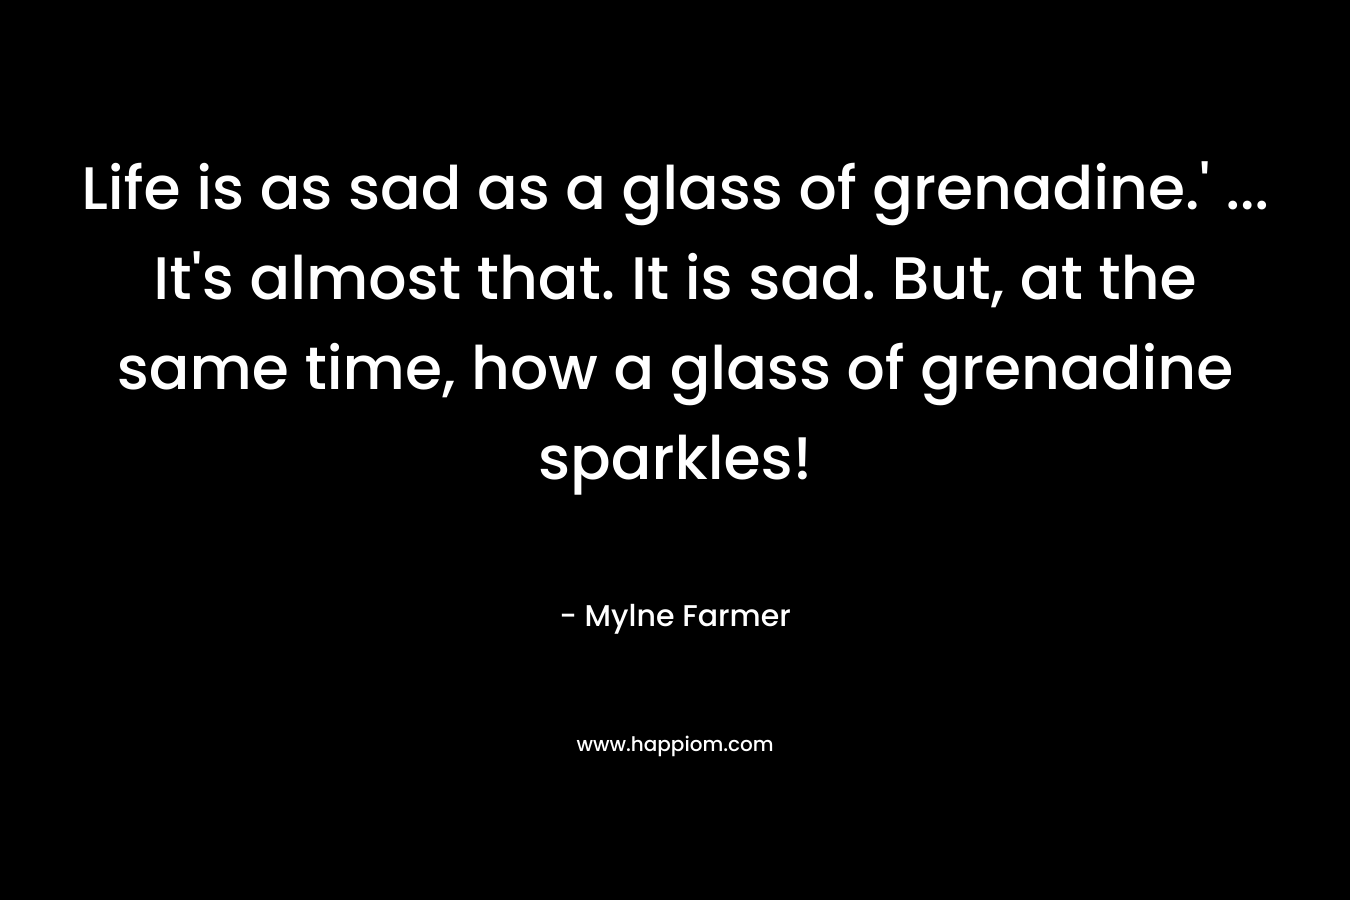 Life is as sad as a glass of grenadine.' ... It's almost that. It is sad. But, at the same time, how a glass of grenadine sparkles!